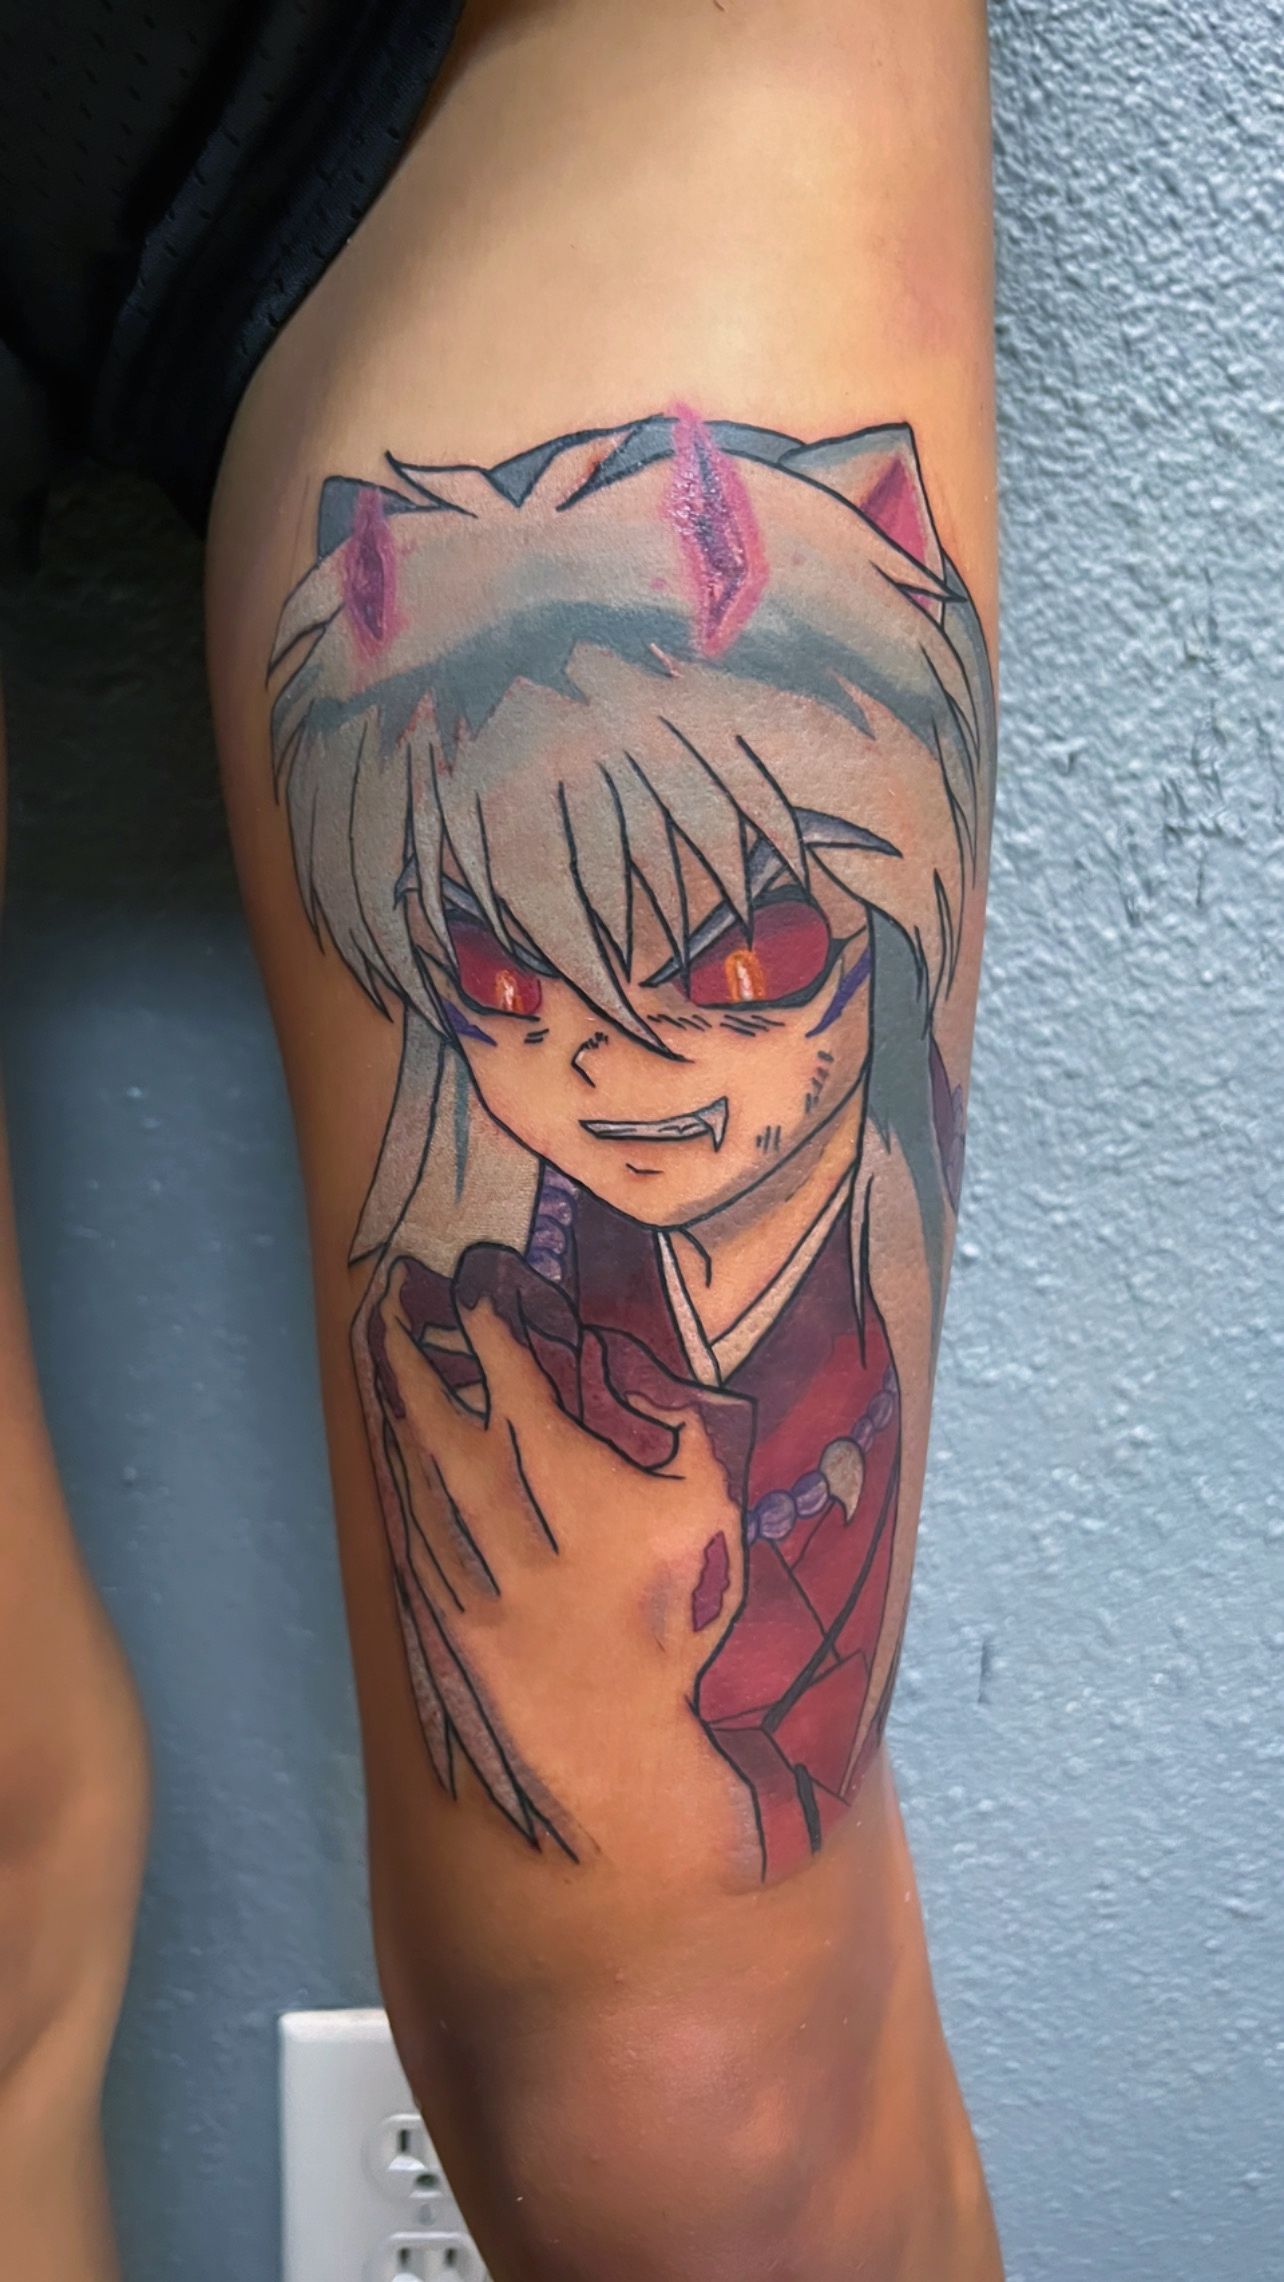 inuyasha in New School Tattoos  Search in 13M Tattoos Now  Tattoodo